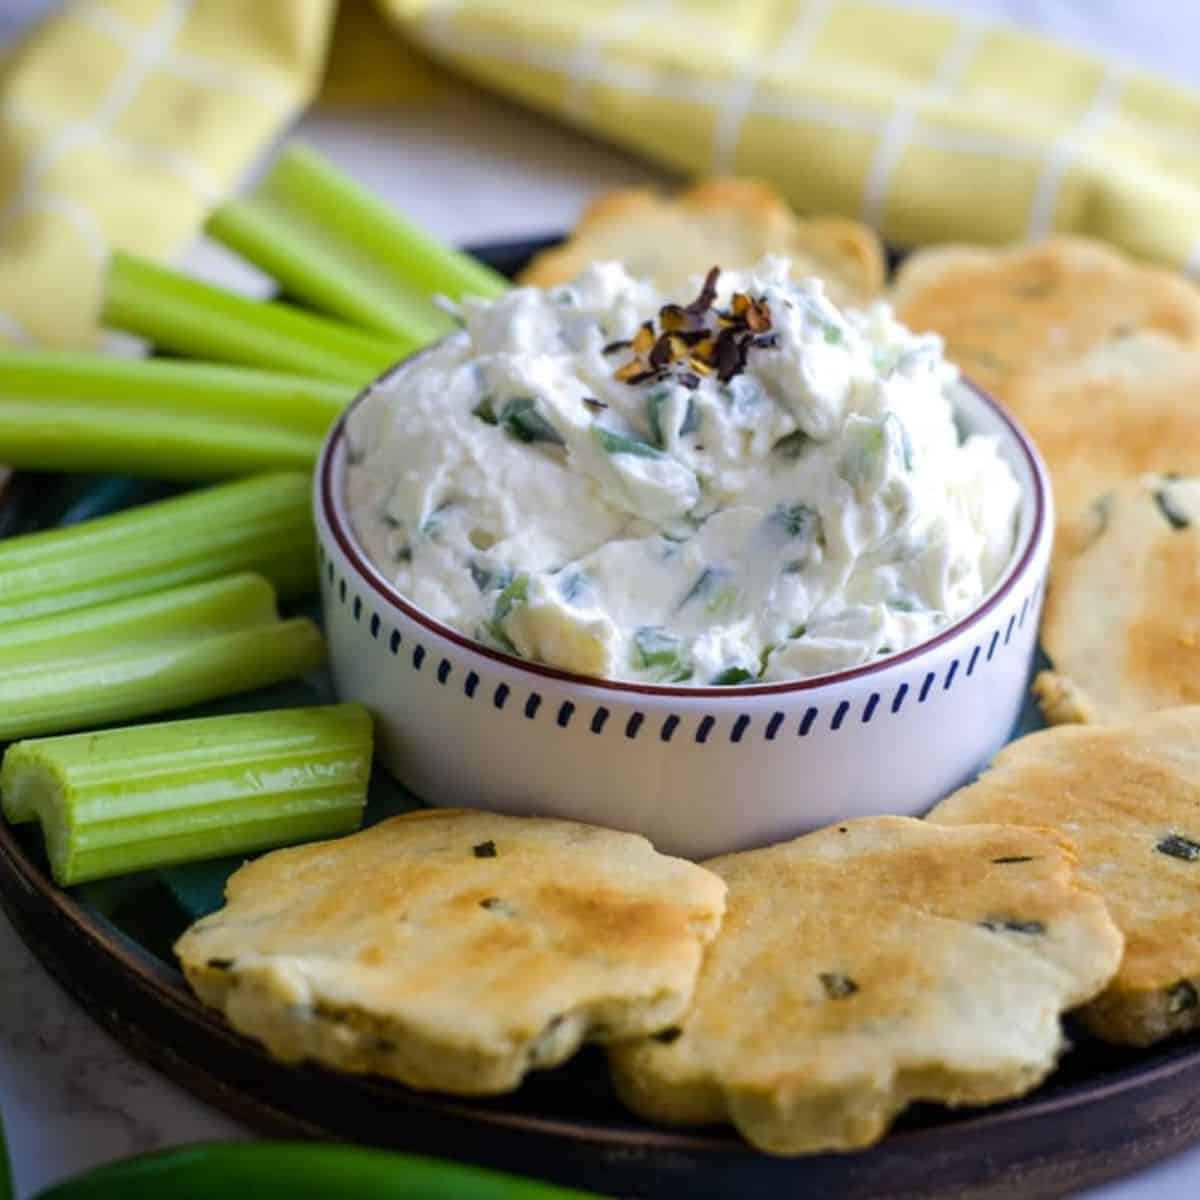 jalapeno cream cheese dip with celery and crackers